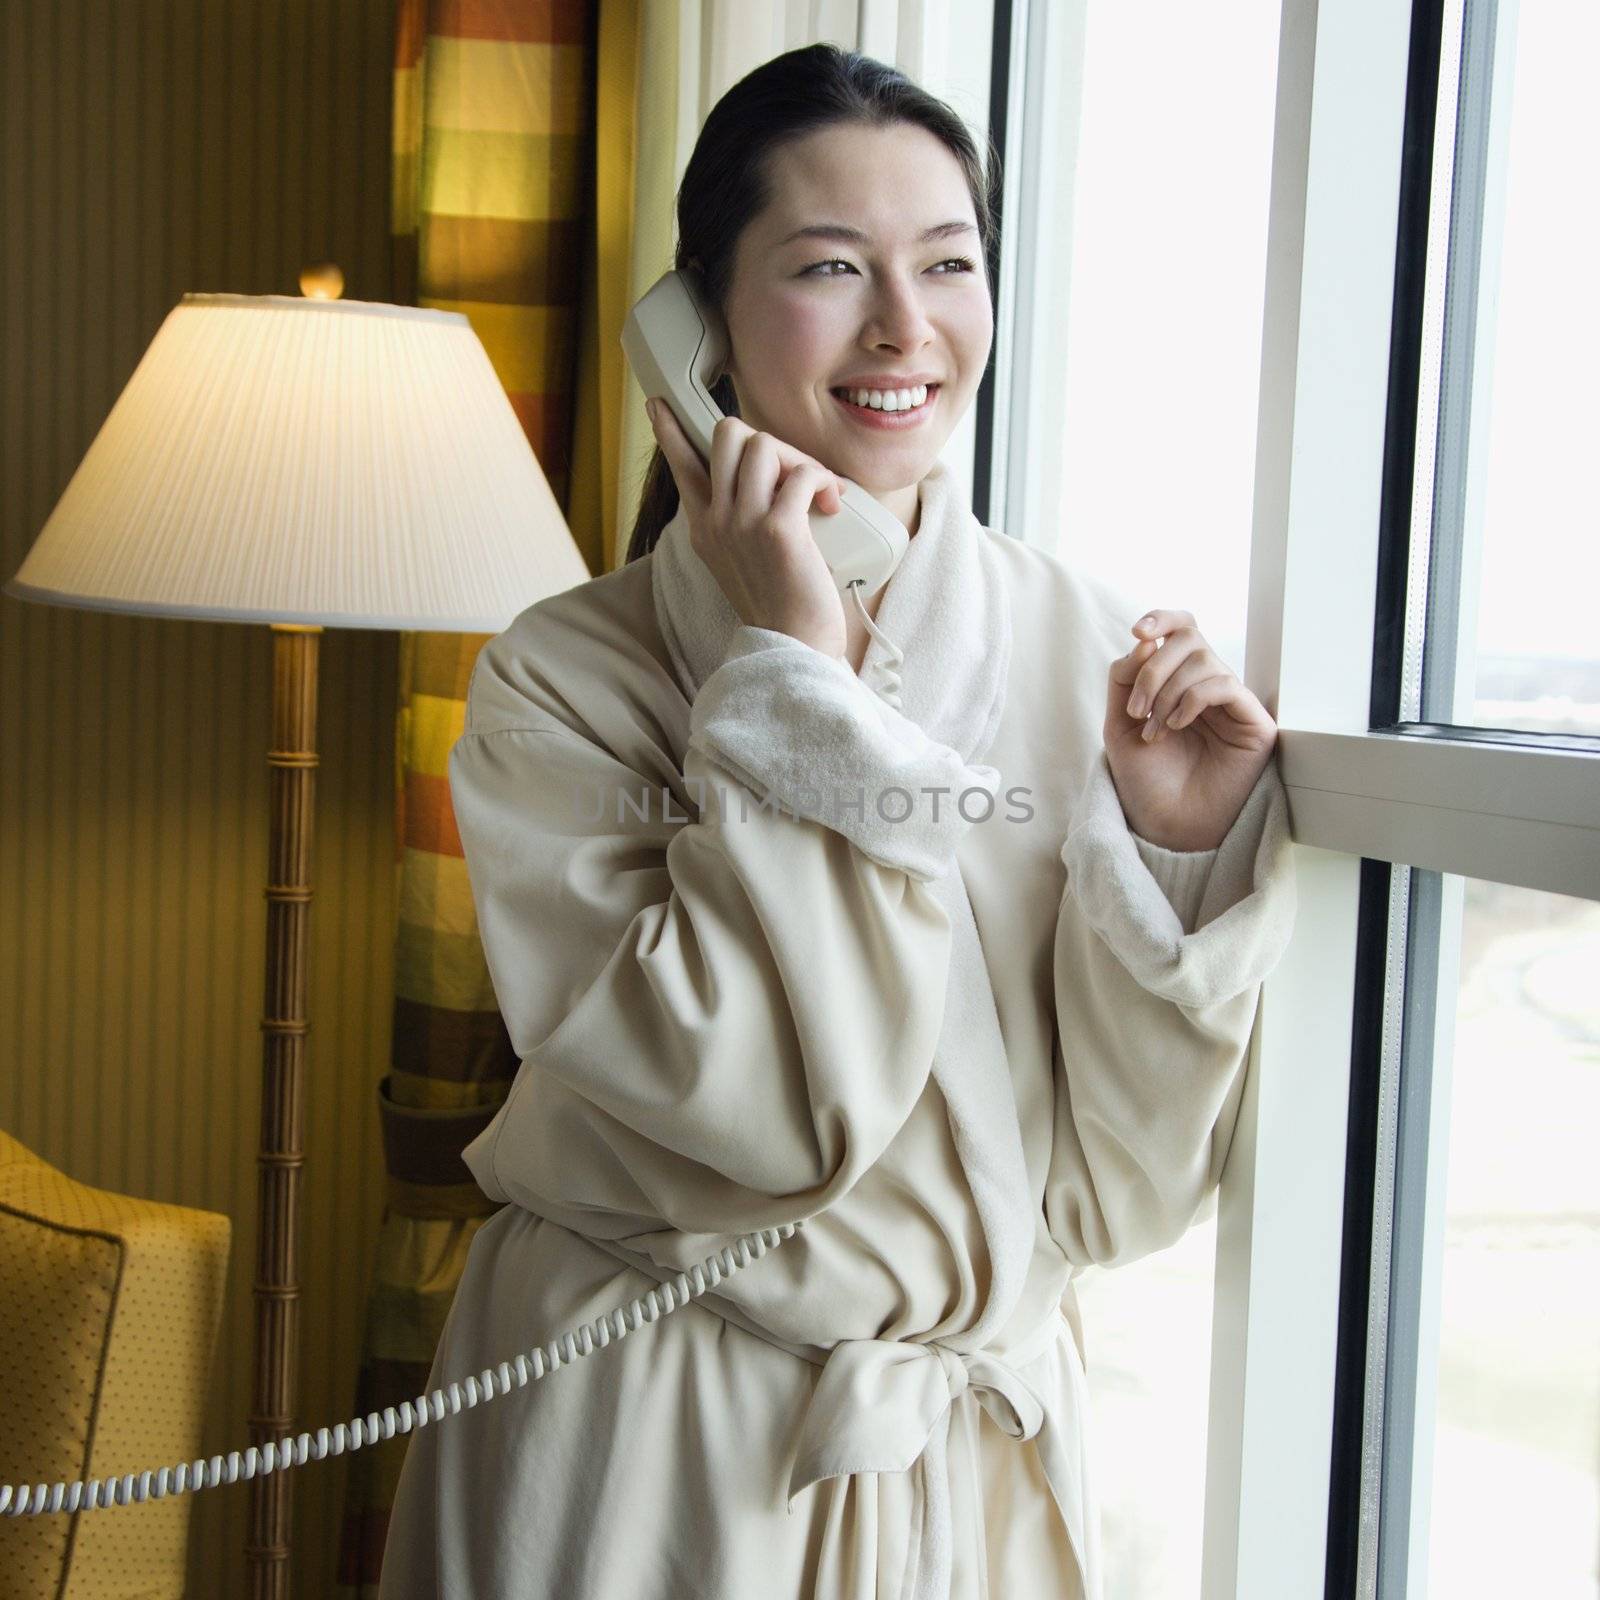 Taiwanese mid adult woman in bathrobe talking on phone and looking out window.